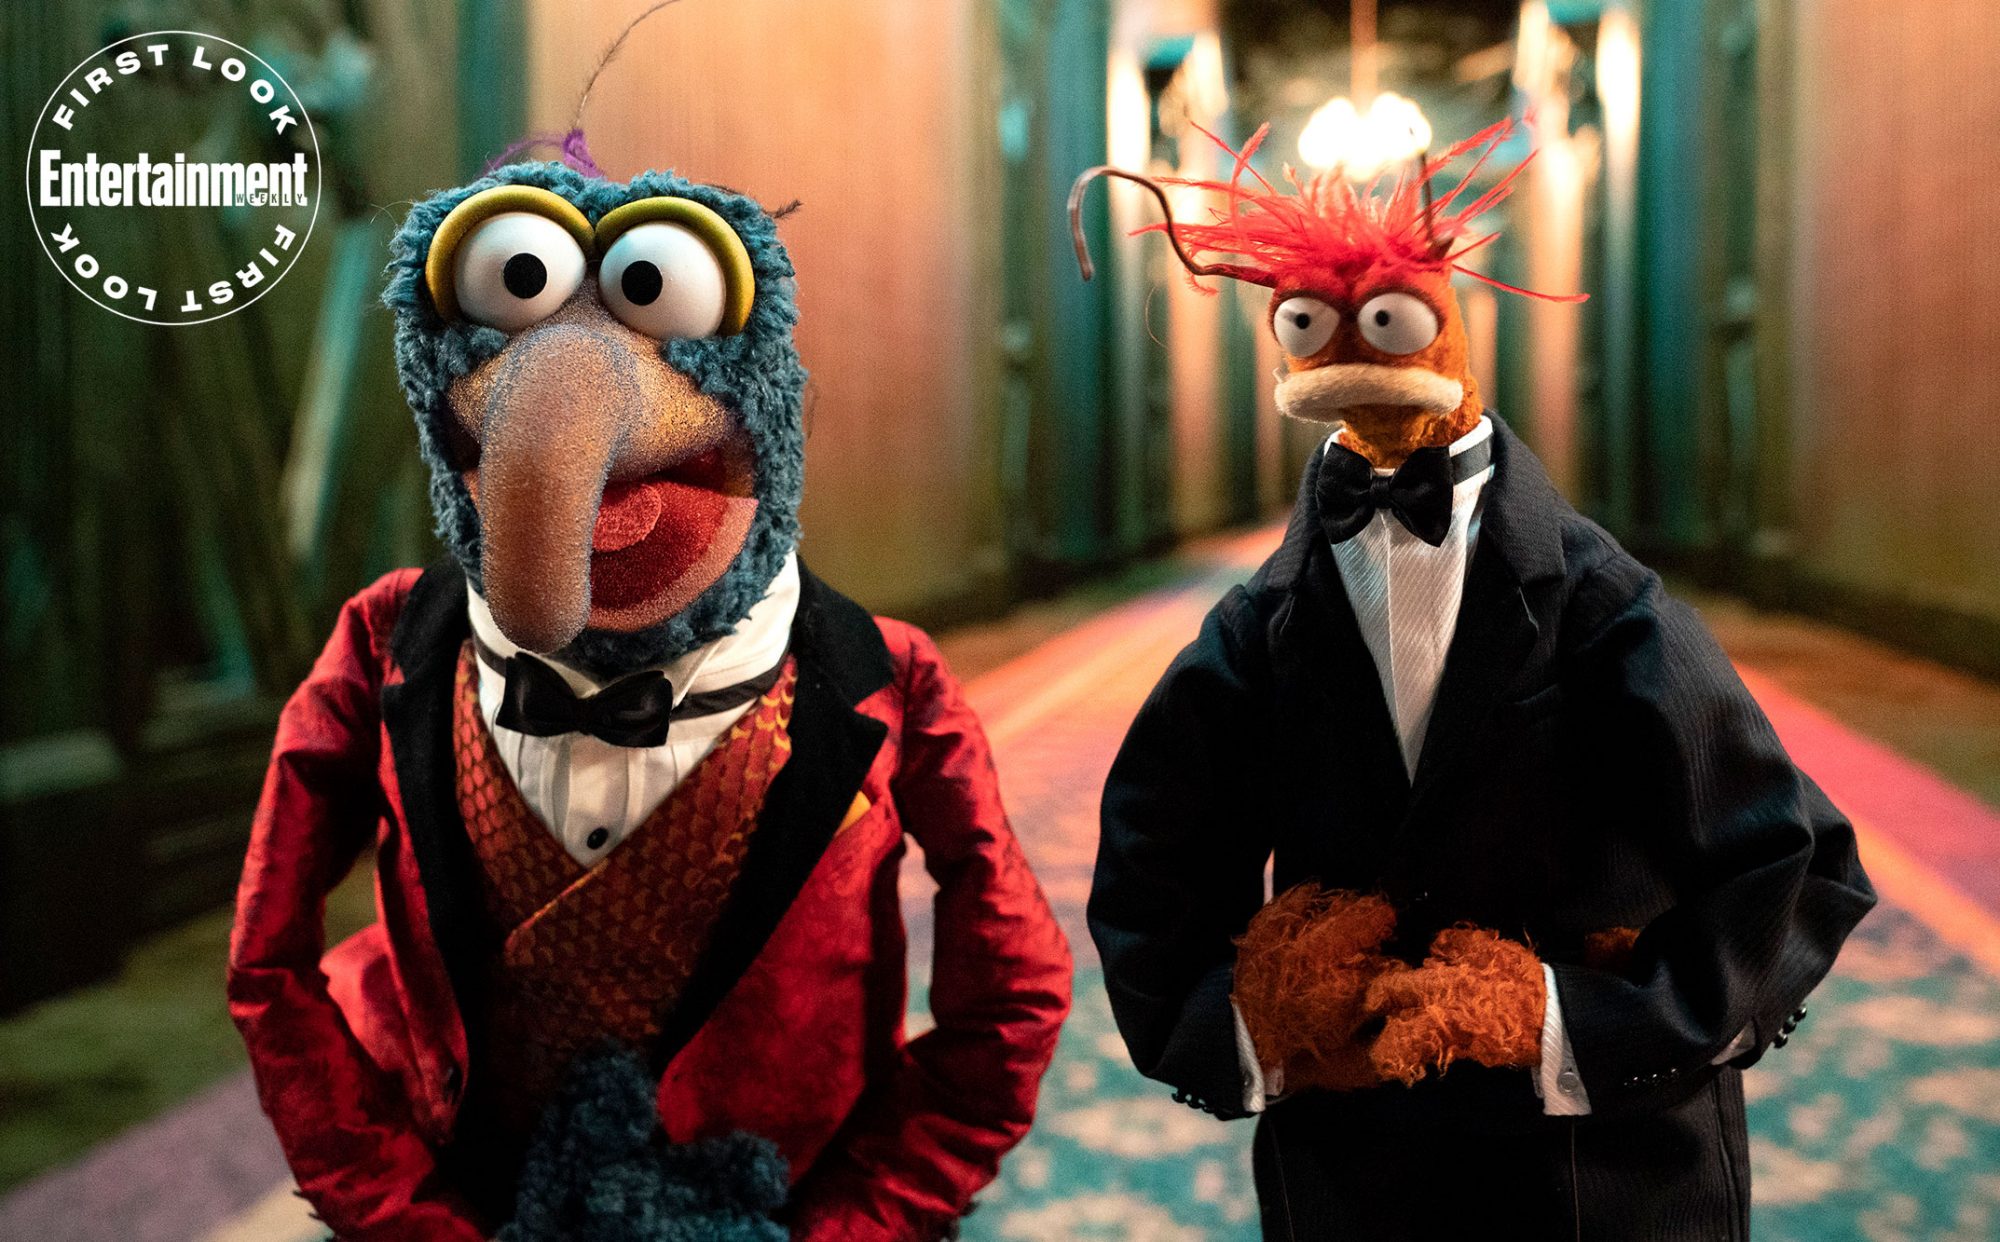 "Muppets Haunted Mansion" First Look Teases Hilarity and Halloween